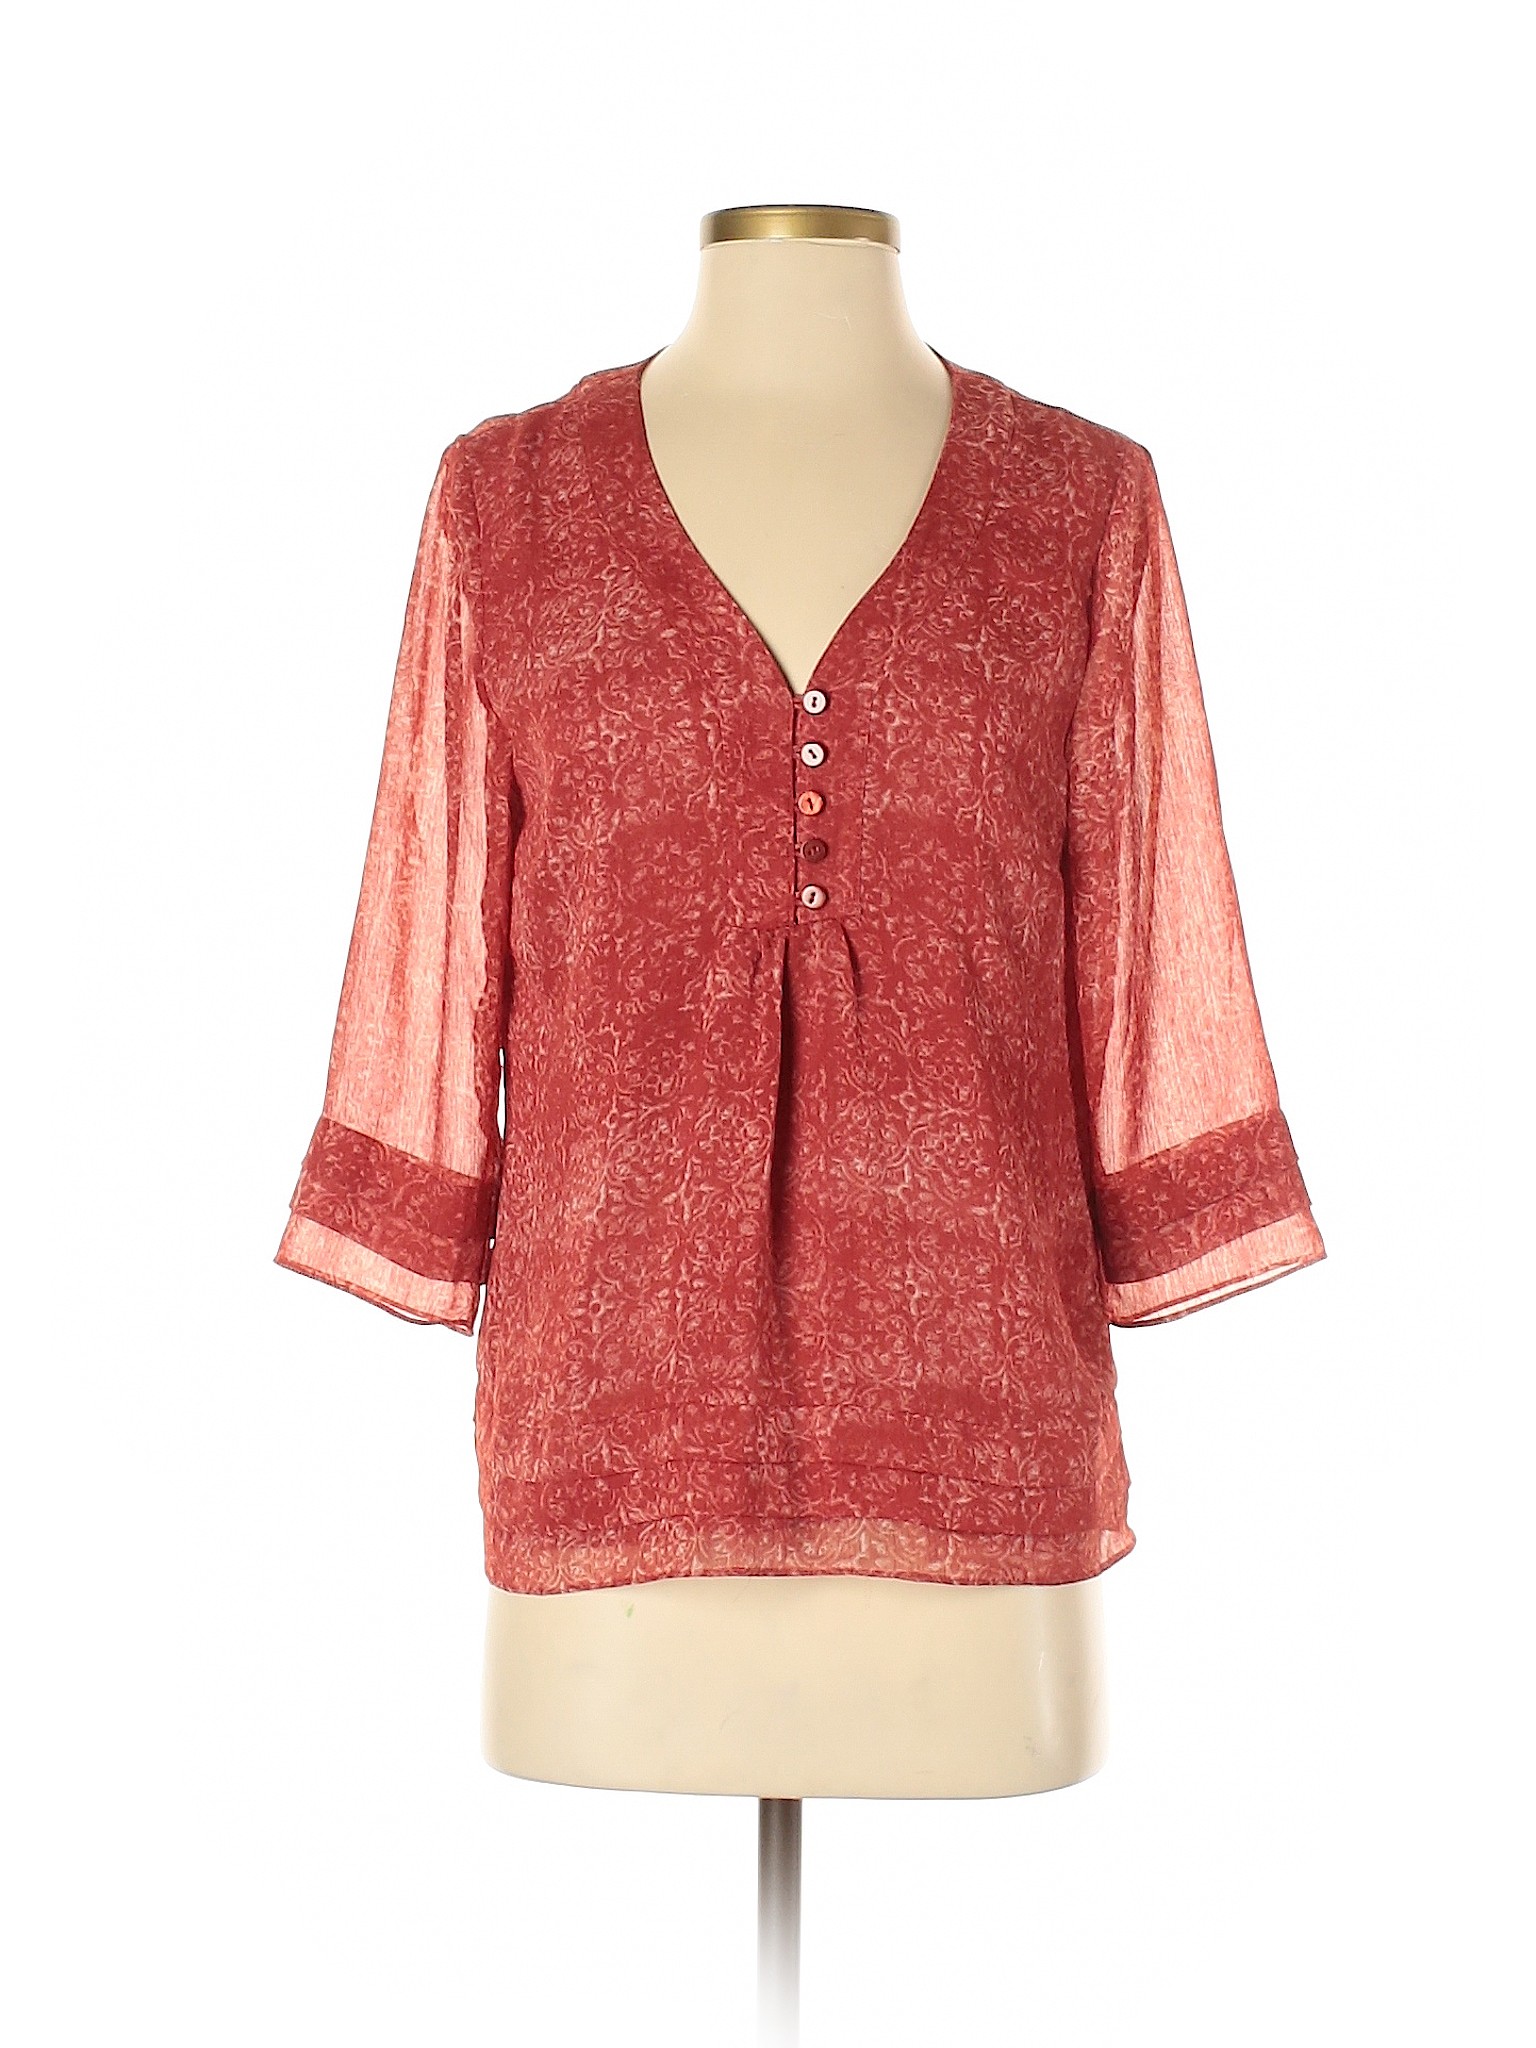 Coldwater Creek Women Red 3/4 Sleeve Blouse S Petites | eBay